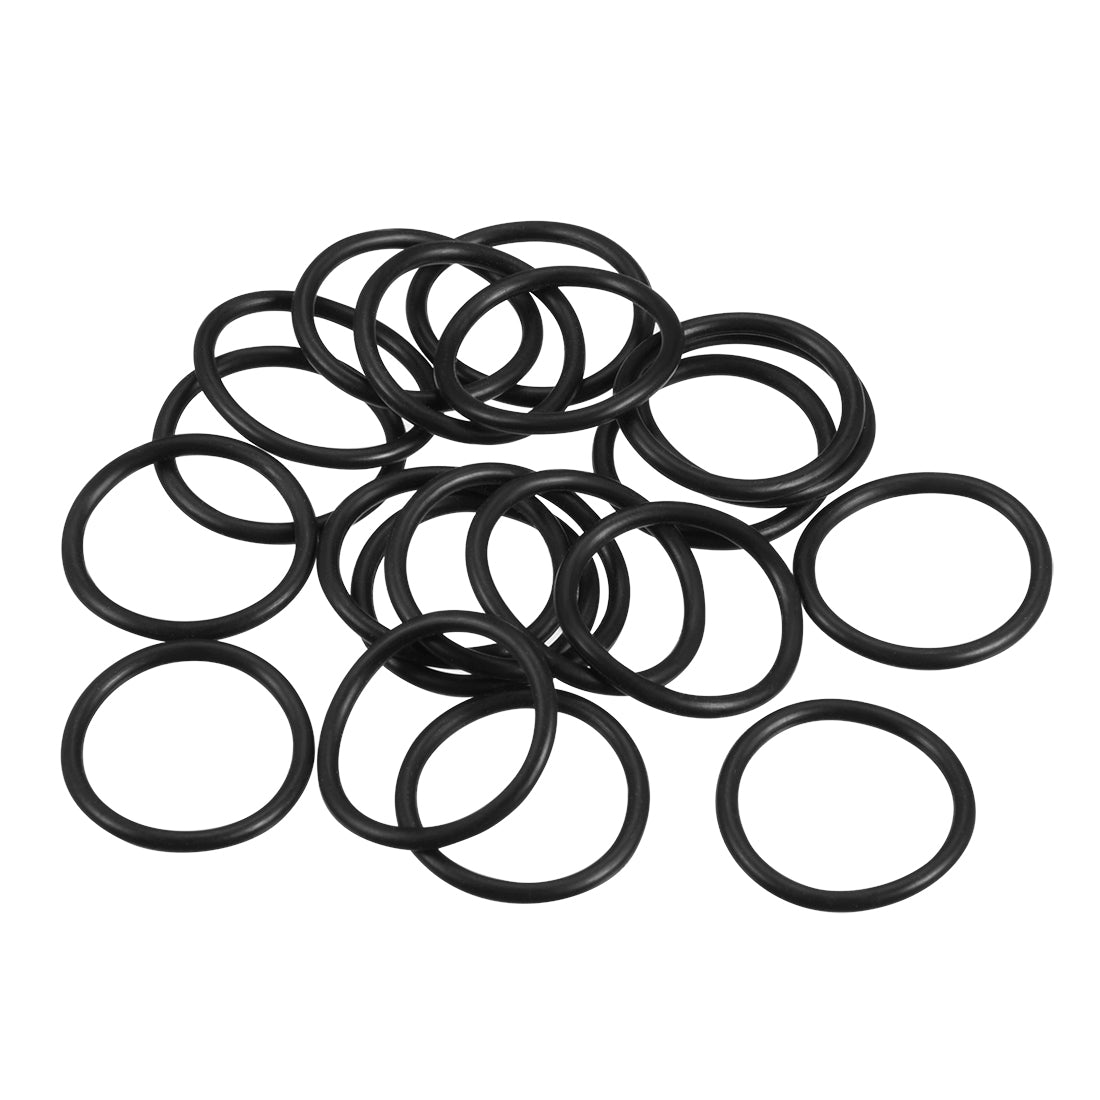 uxcell Uxcell O-Rings Nitrile Rubber 22.4mm x 26mm x 1.8mm Seal Rings Sealing Gasket 20pcs